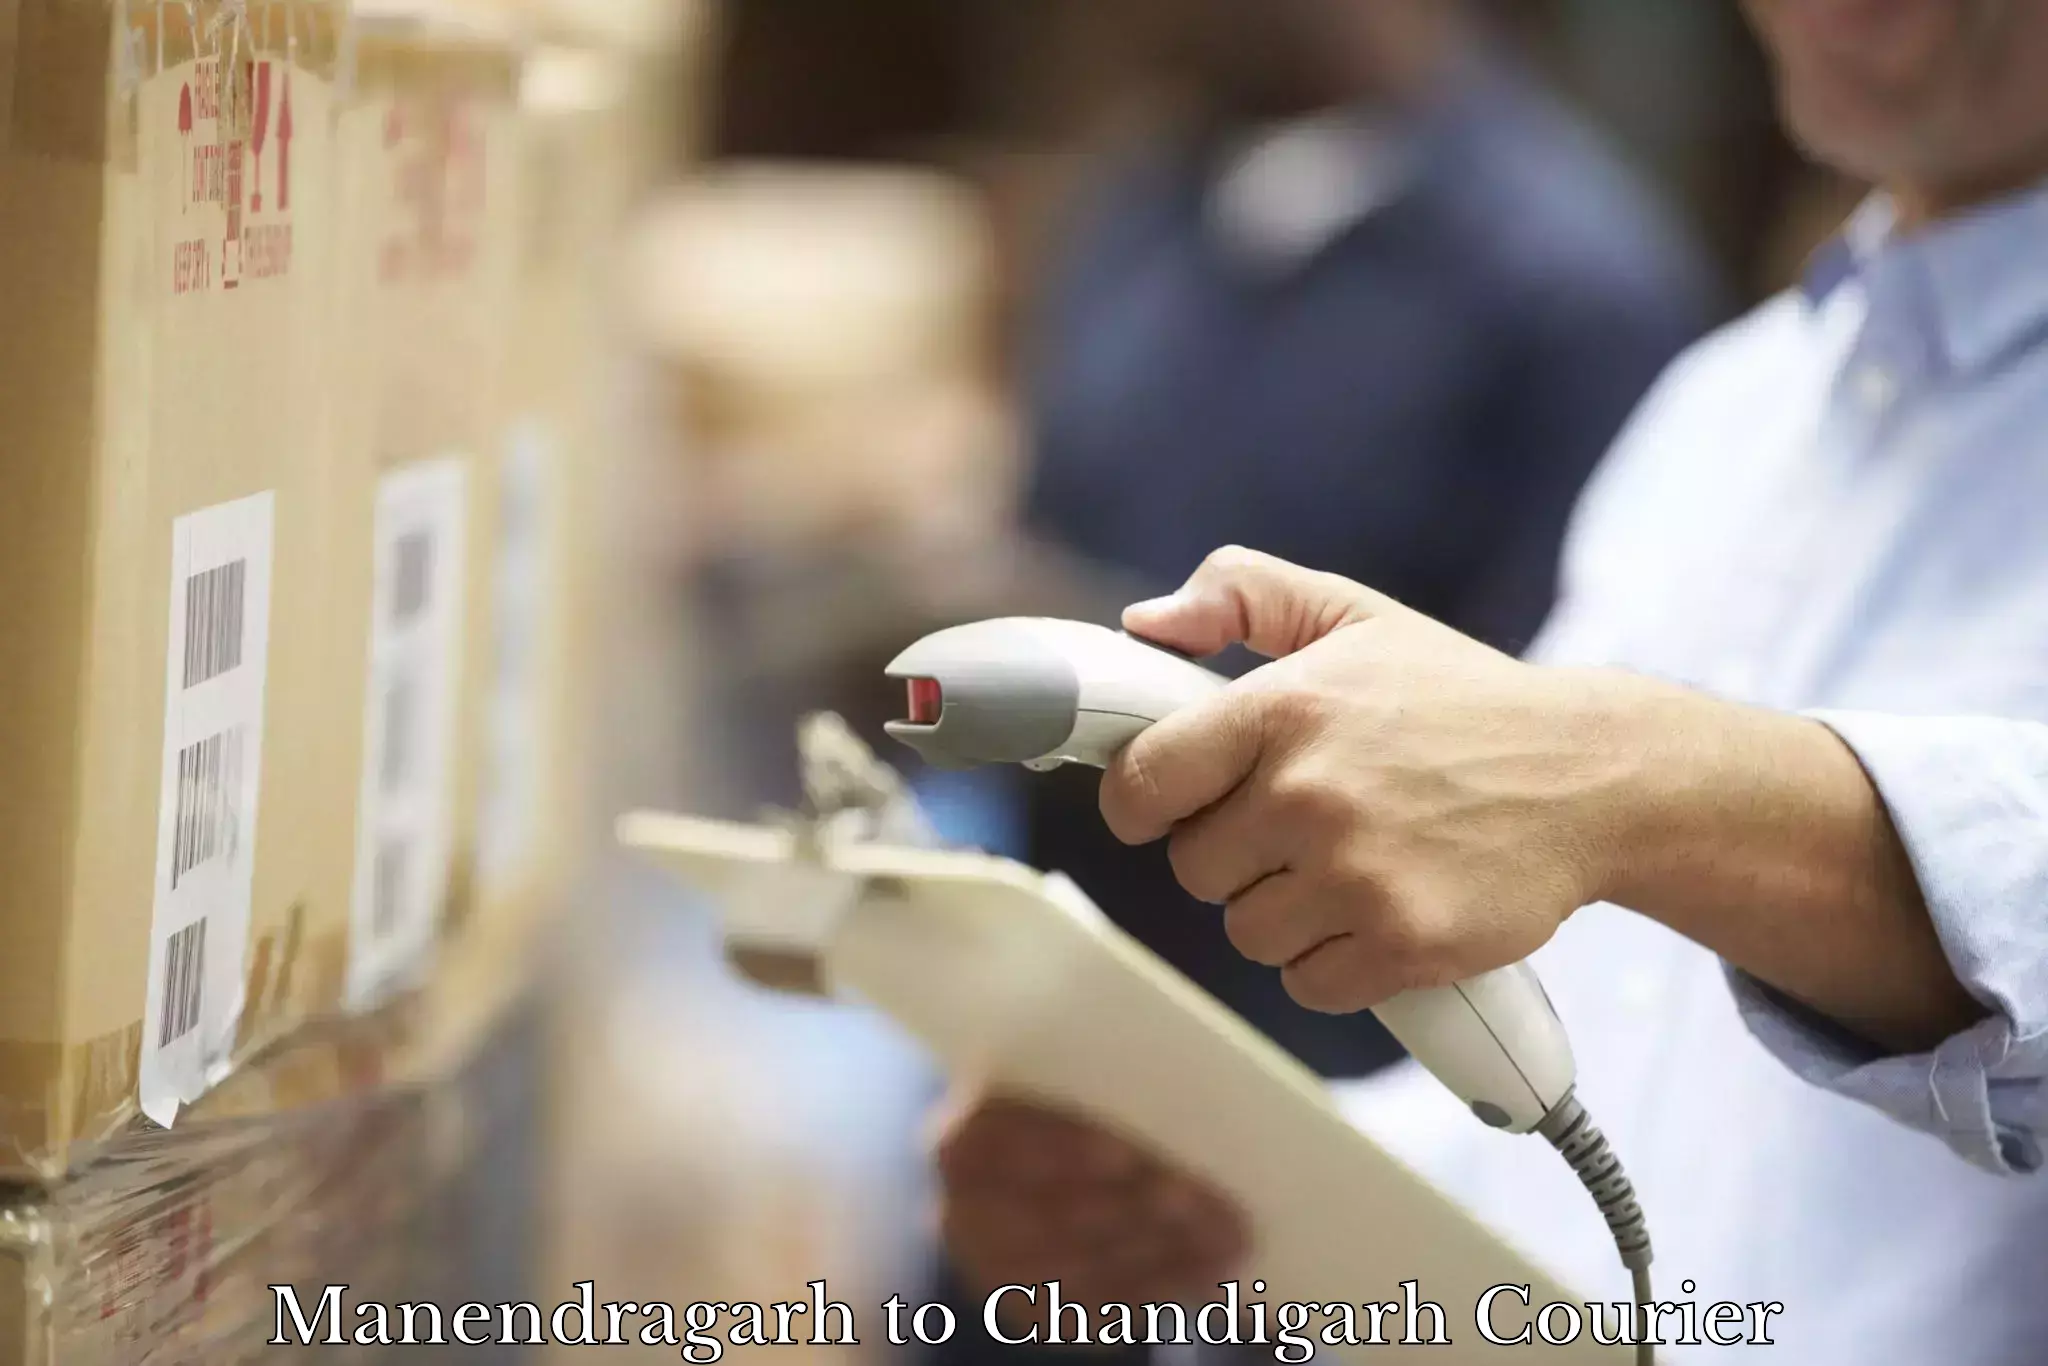 Express delivery solutions Manendragarh to Chandigarh